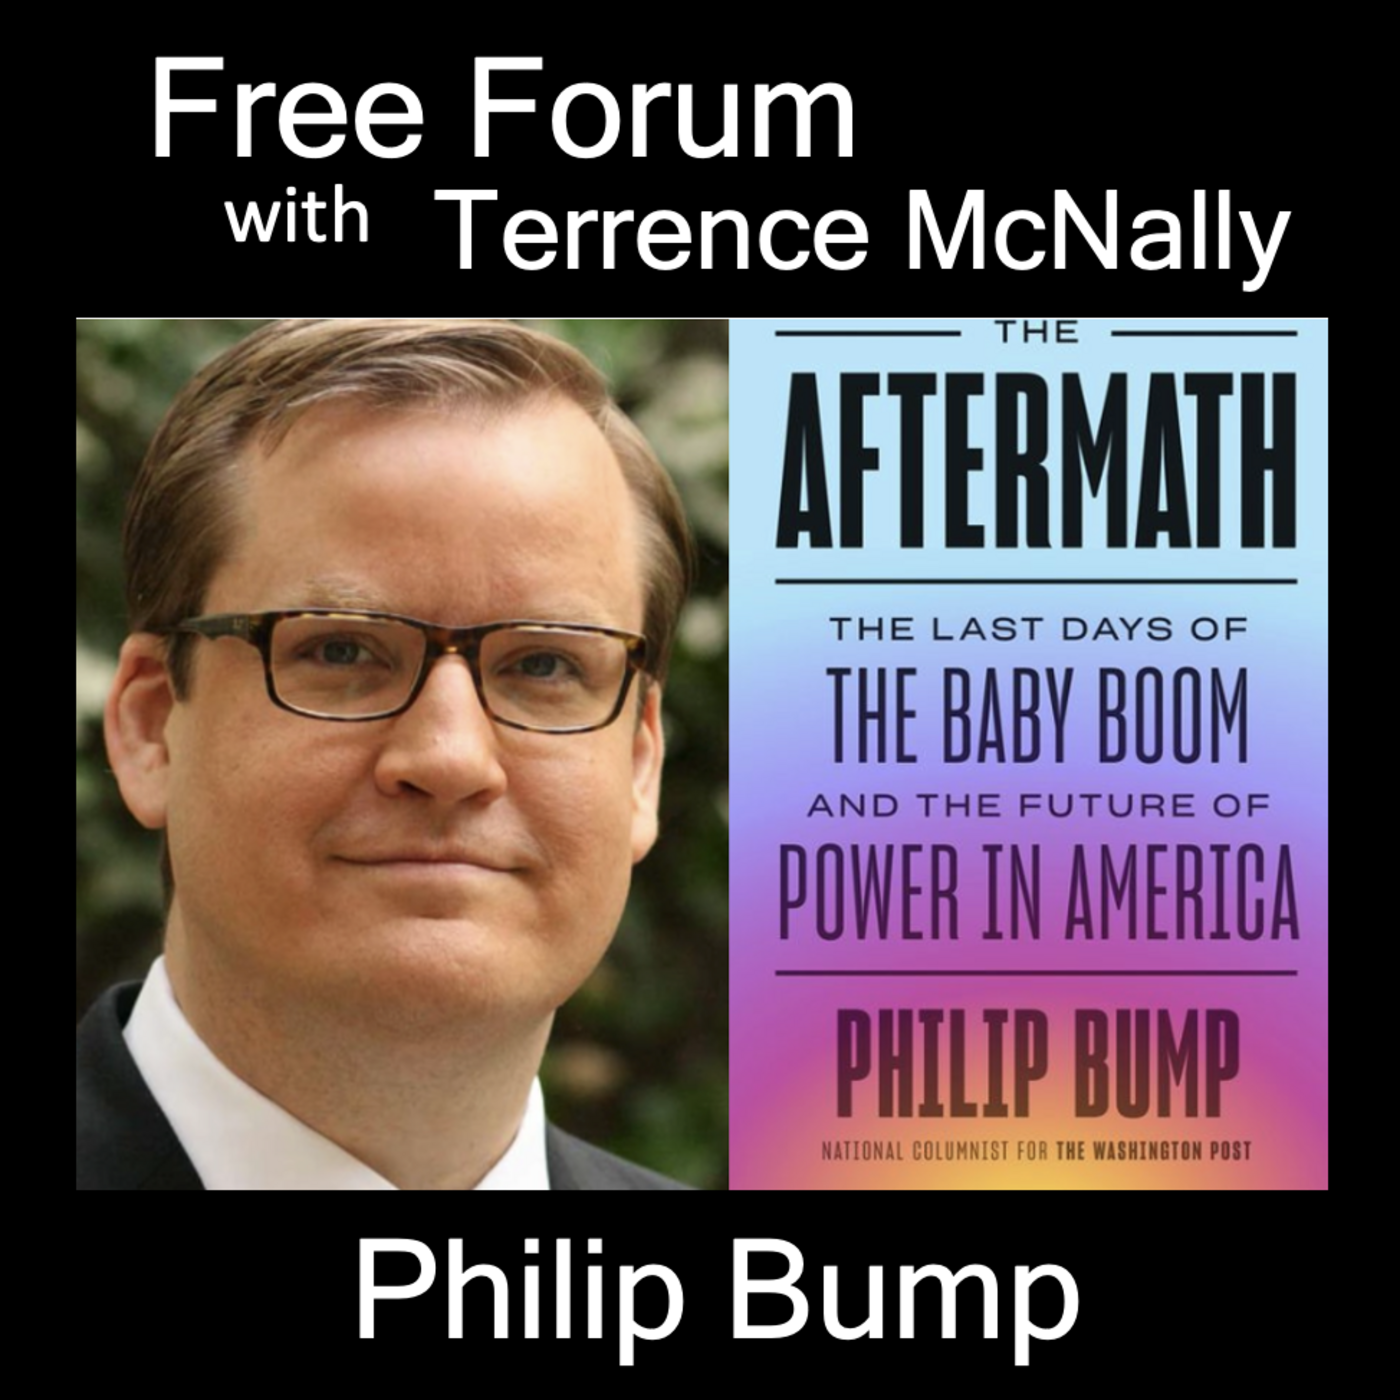 Episode 611: How will Boomers pass the torch? PHILIP BUMP-The Aftermath: The Last Days of the Baby Boom and the Future of Power in America